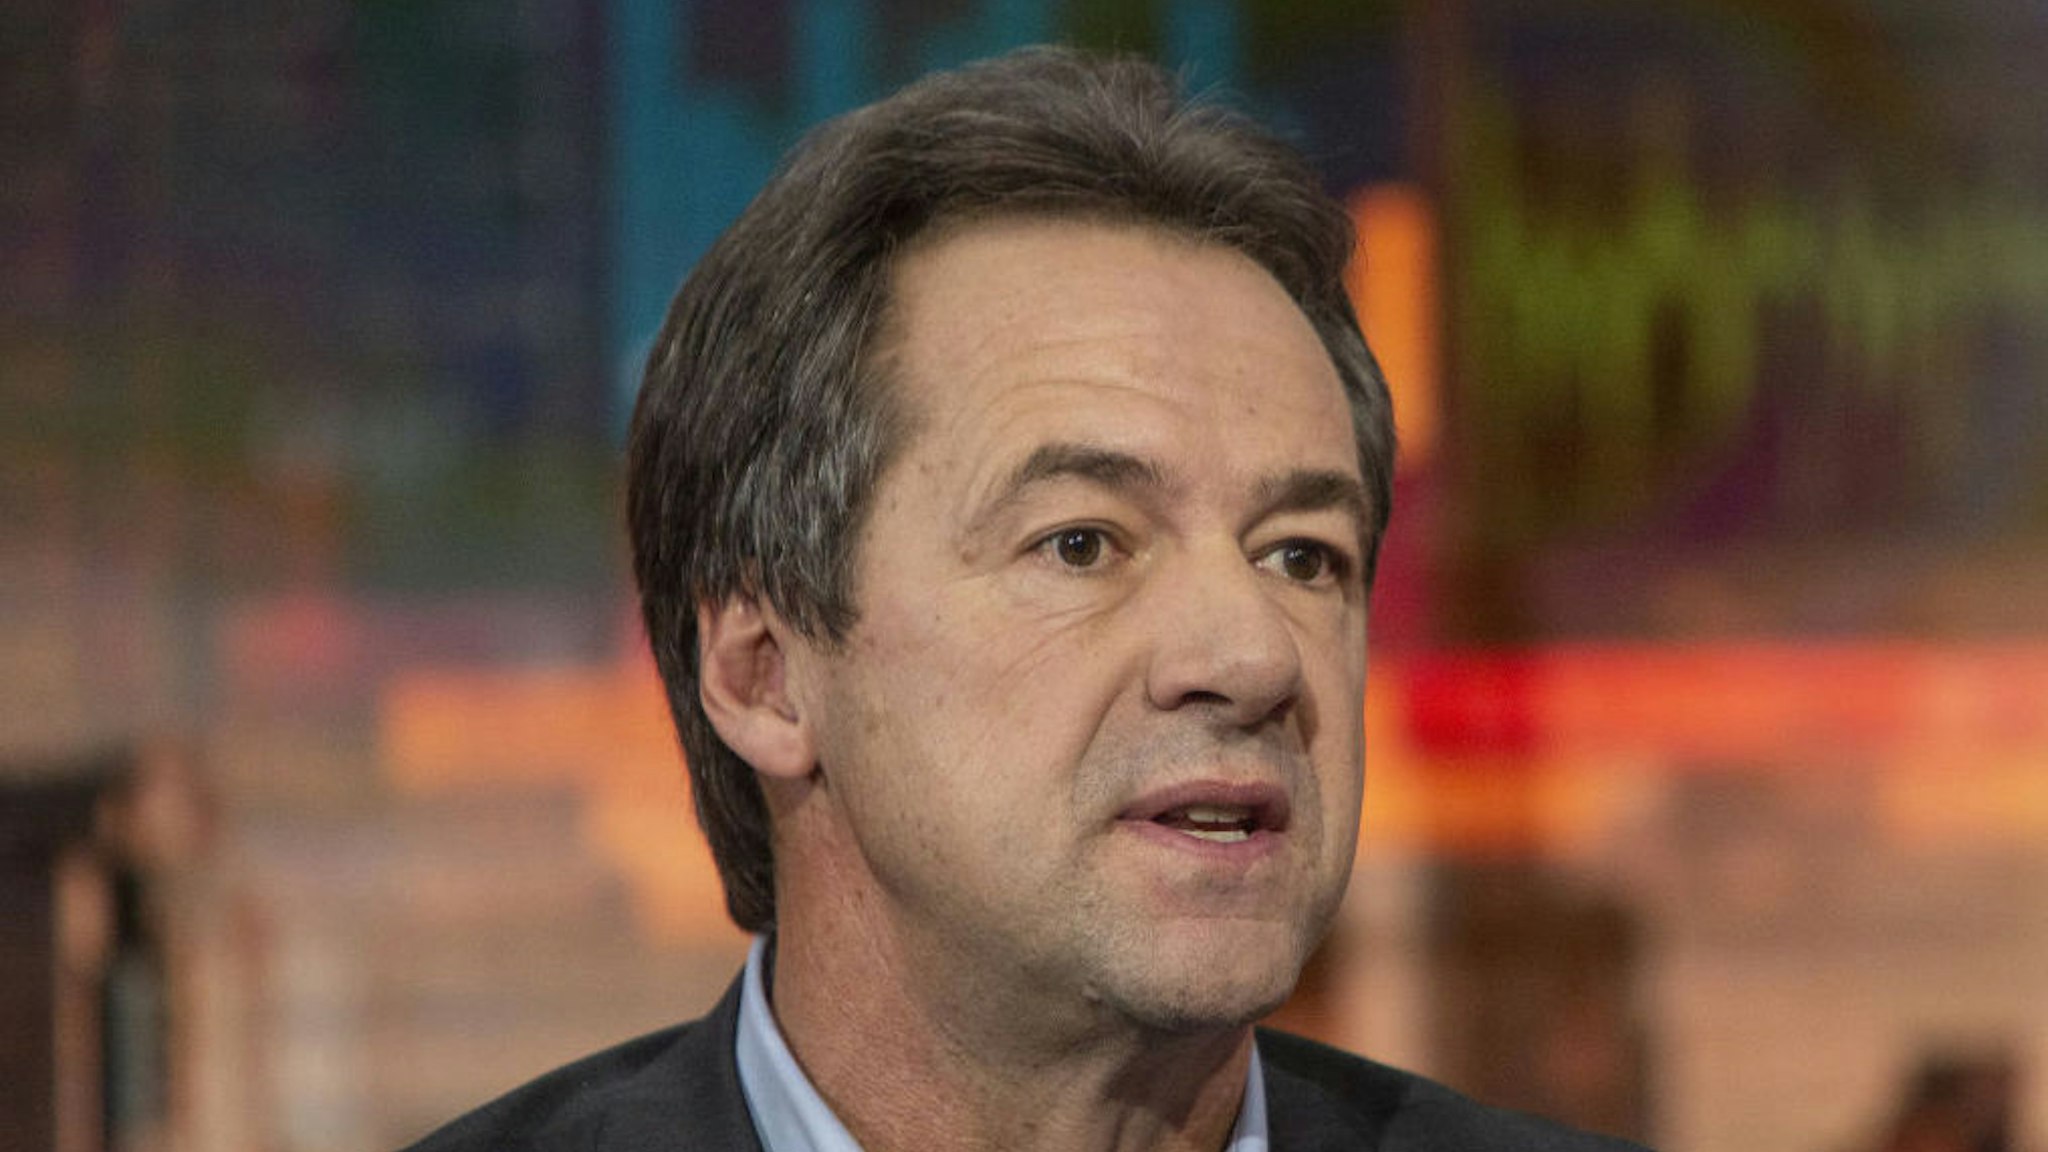 Steve Bullock, governor of Montana and 2020 presidential candidate, speaks during a Bloomberg Television interview in New York, U.S., on Tuesday, Nov. 19, 2019. Bullock discussed the election, health care, and the impeachment inquiry of President Donald Trump